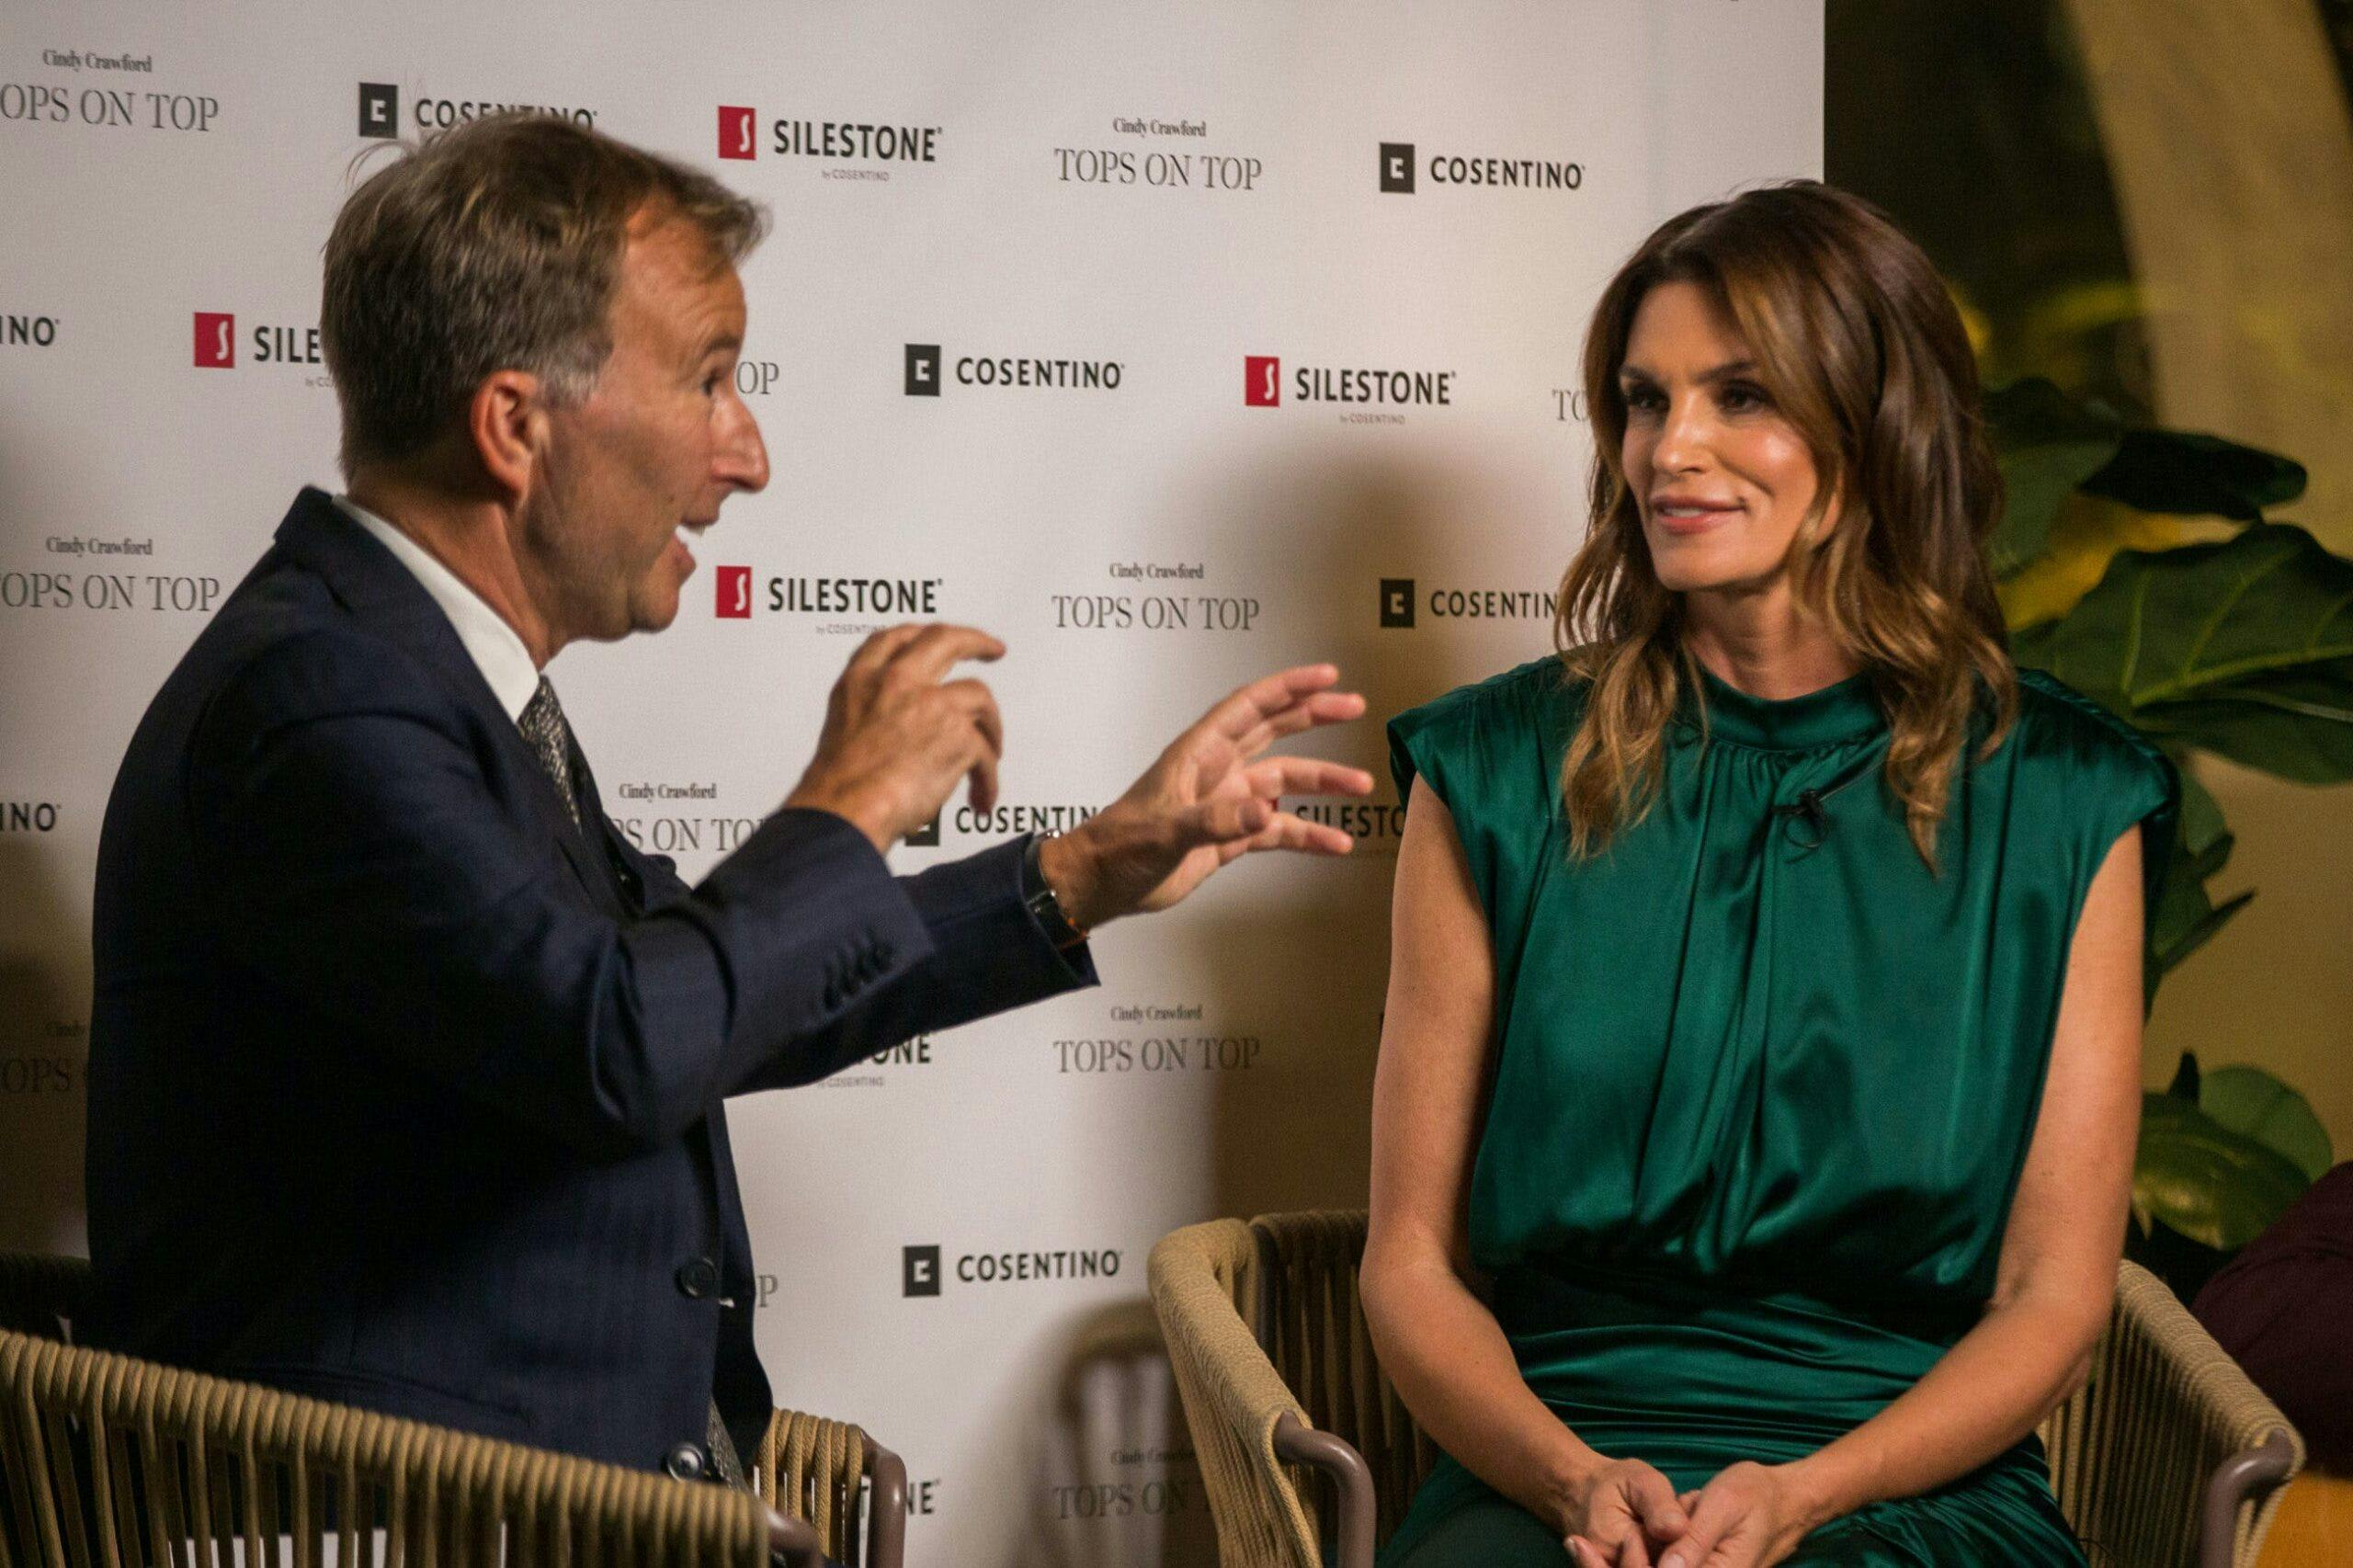 Image 34 of Tony Chambers y Cindy Crawford Silestone Londres 1 scaled in Silestone® Presents its New "Tops on Top 2019" Campaign Featuring Cindy Crawford - Cosentino